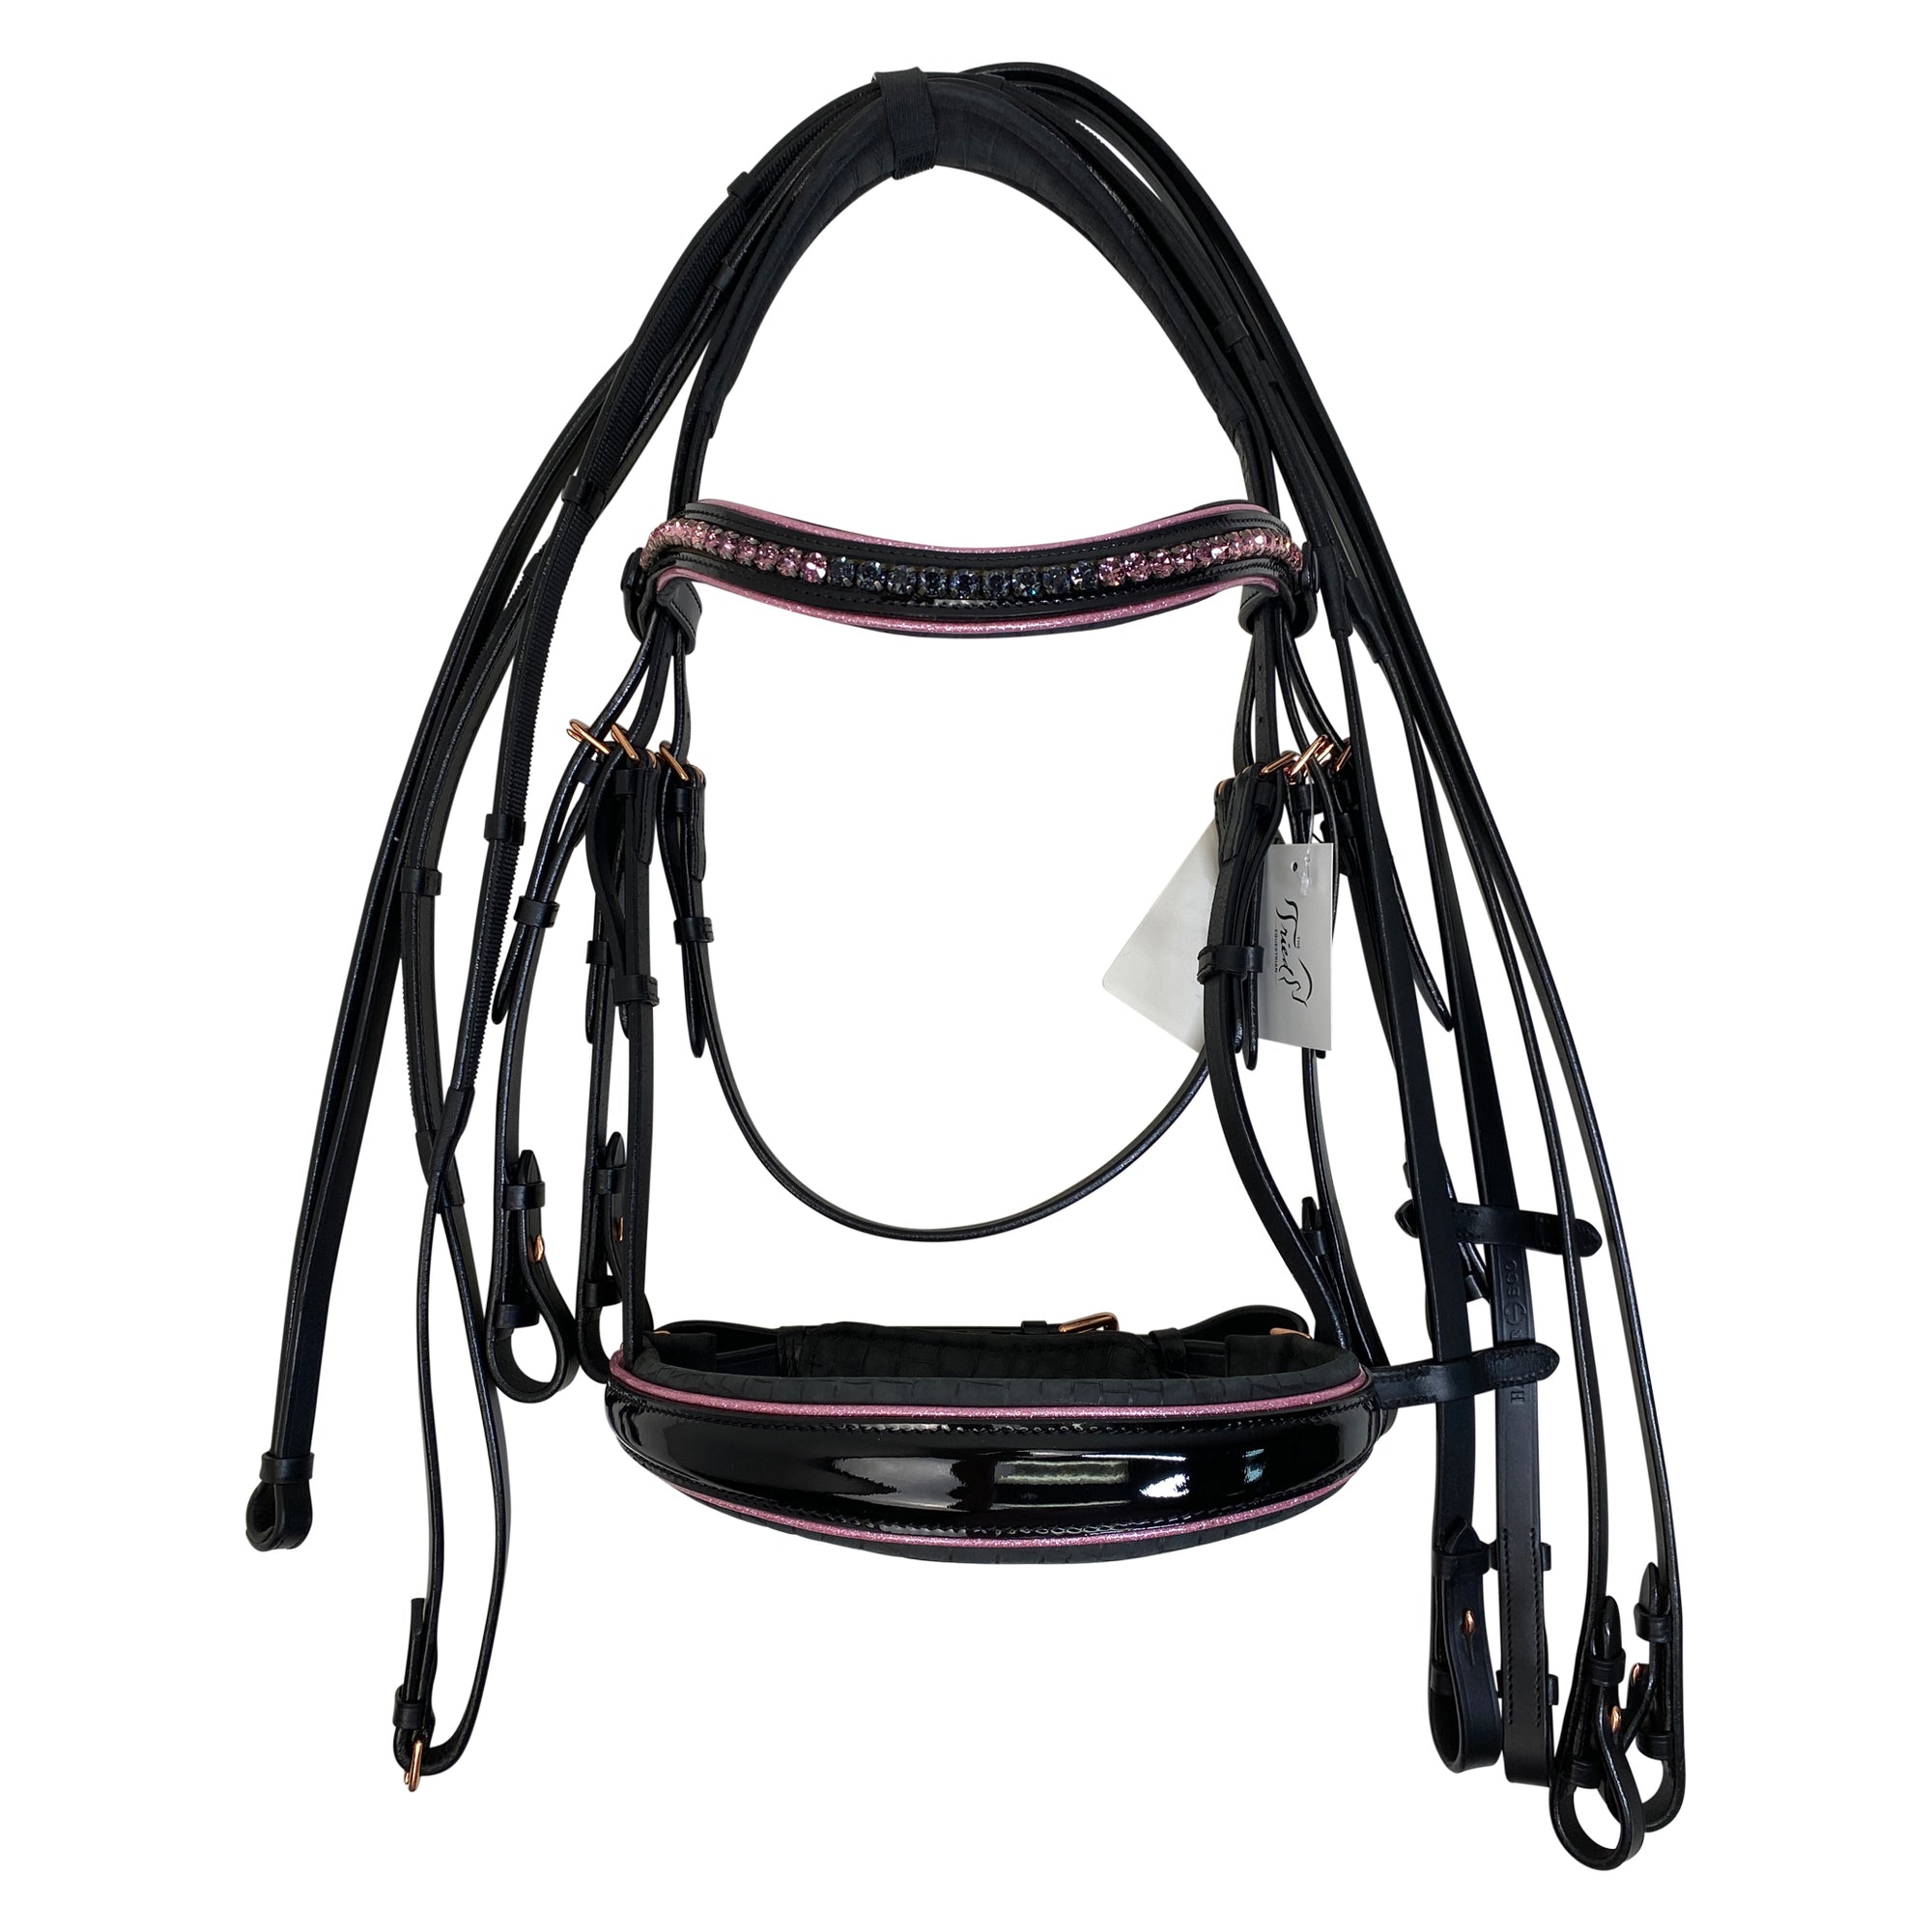 Halter Ego 'Monroe' Patent Double Snaffle Bridle in Black/Pink